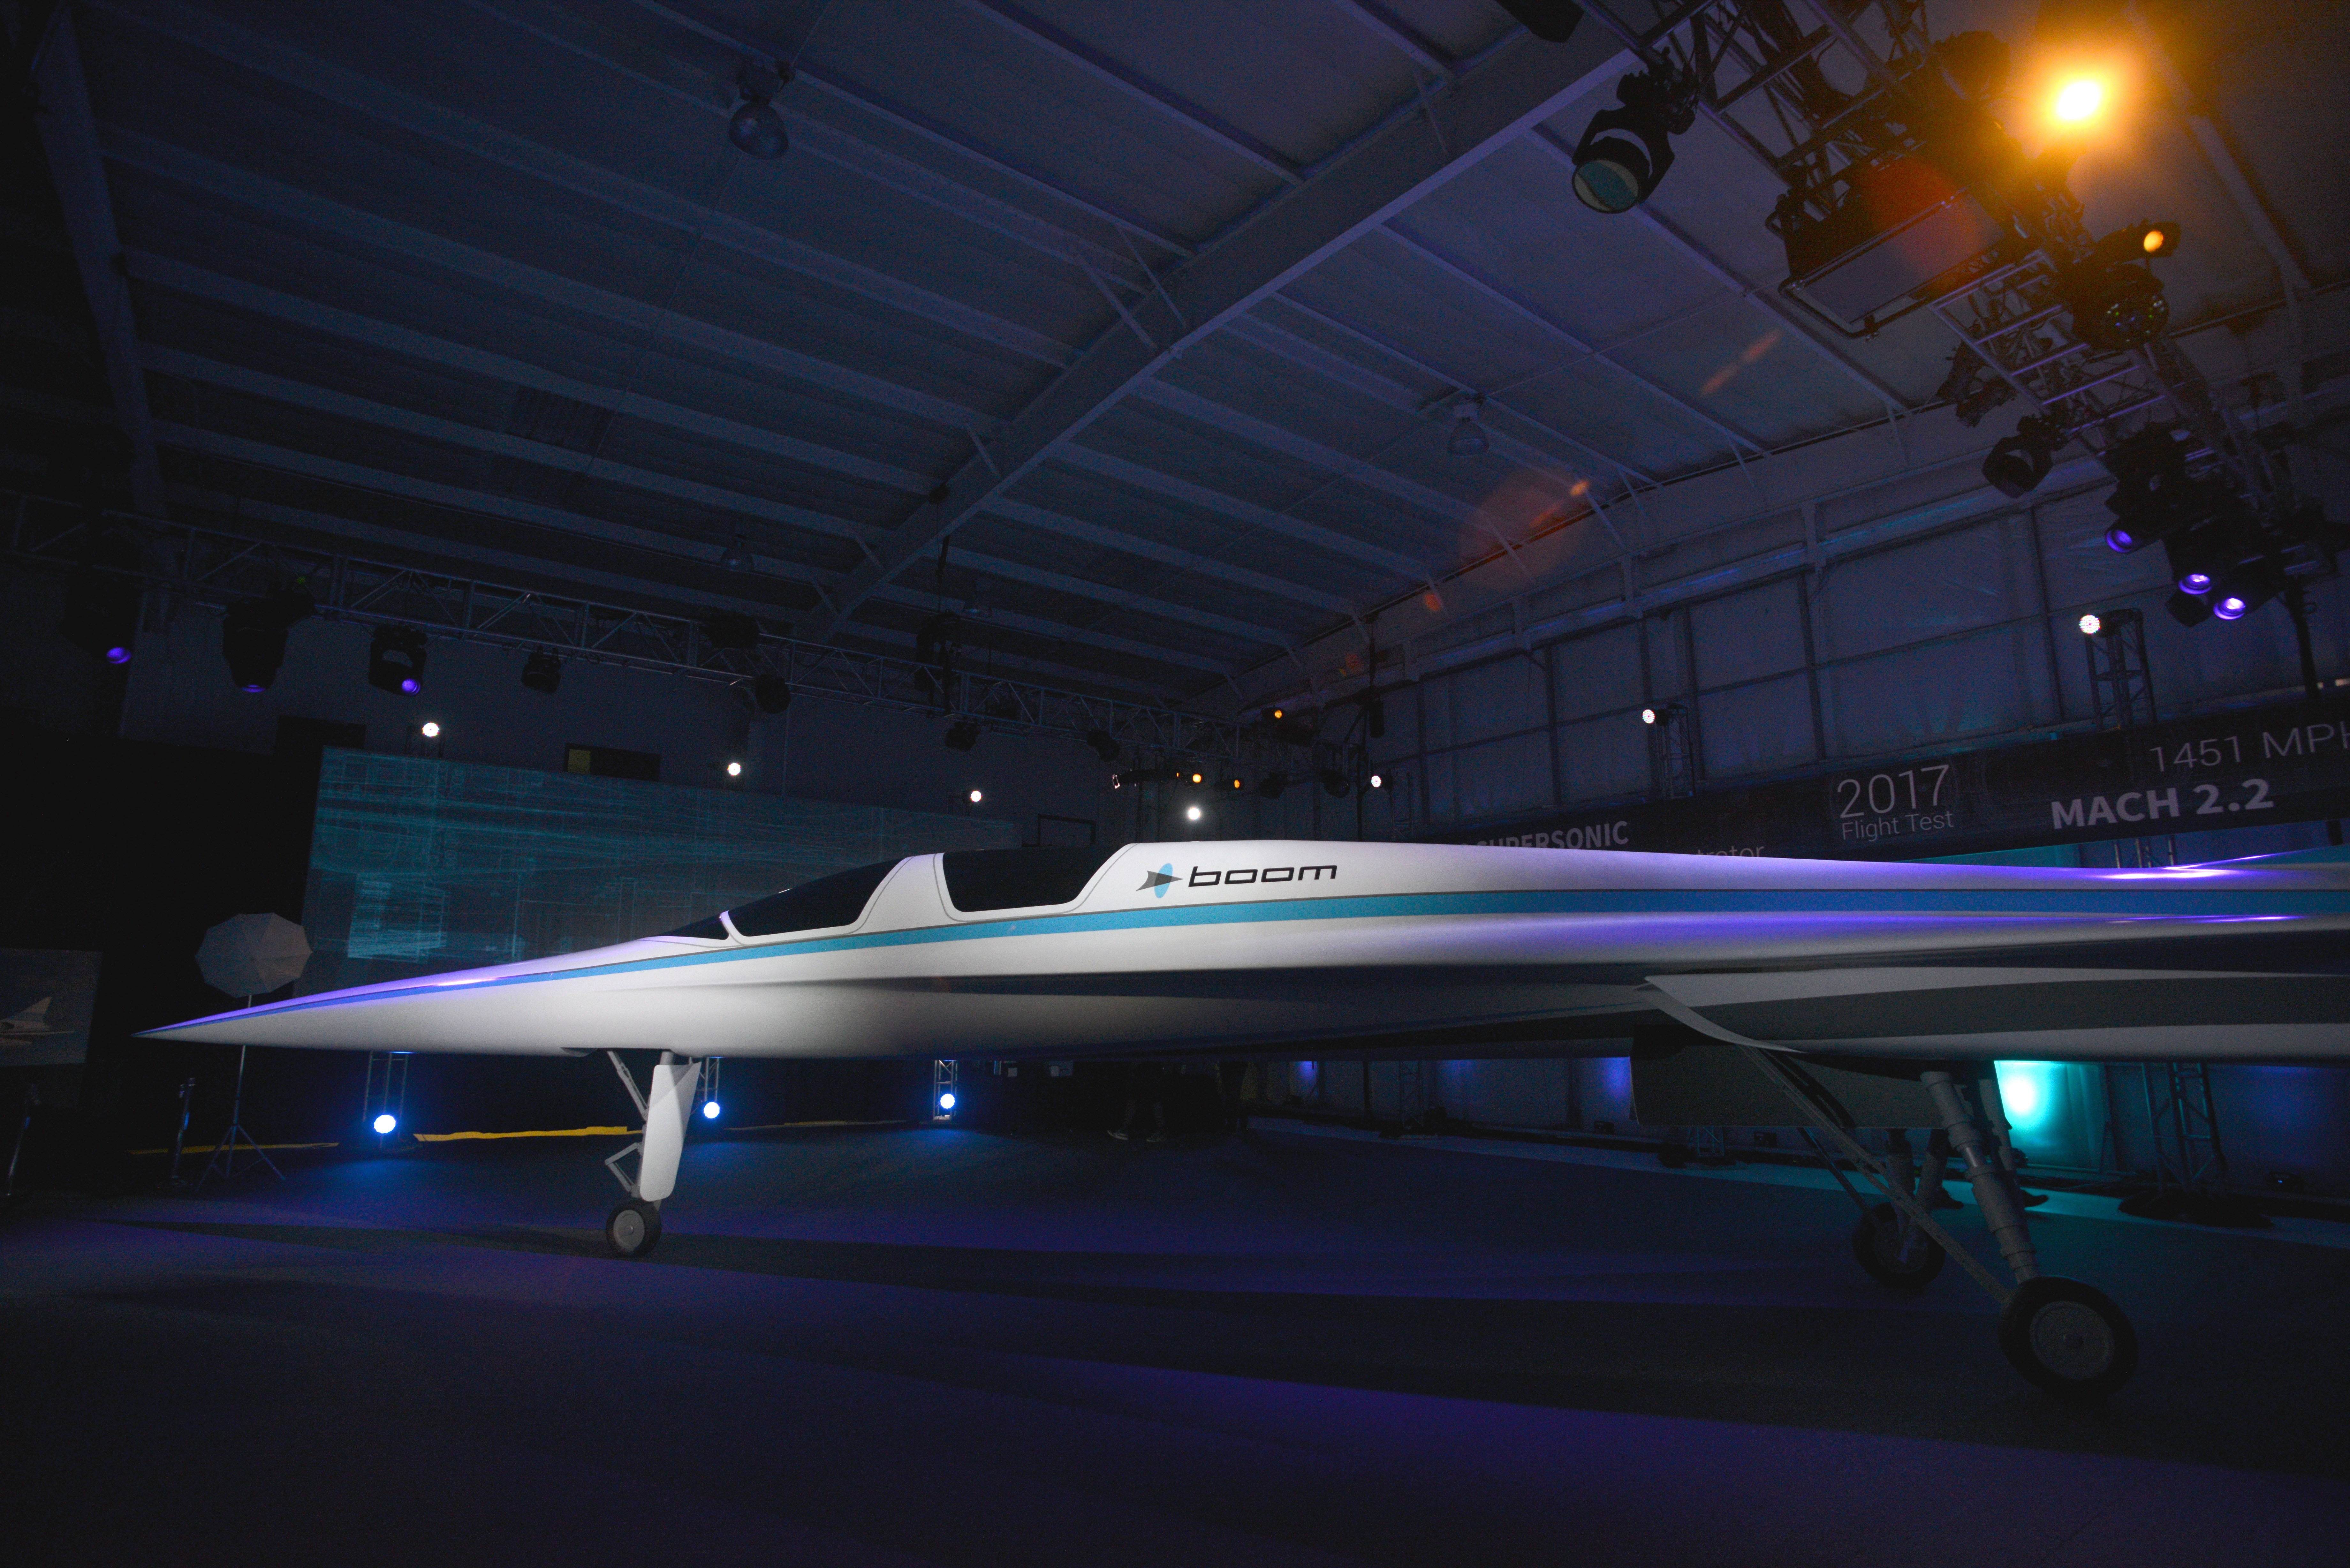 This startup is building the world’s next supersonic jet